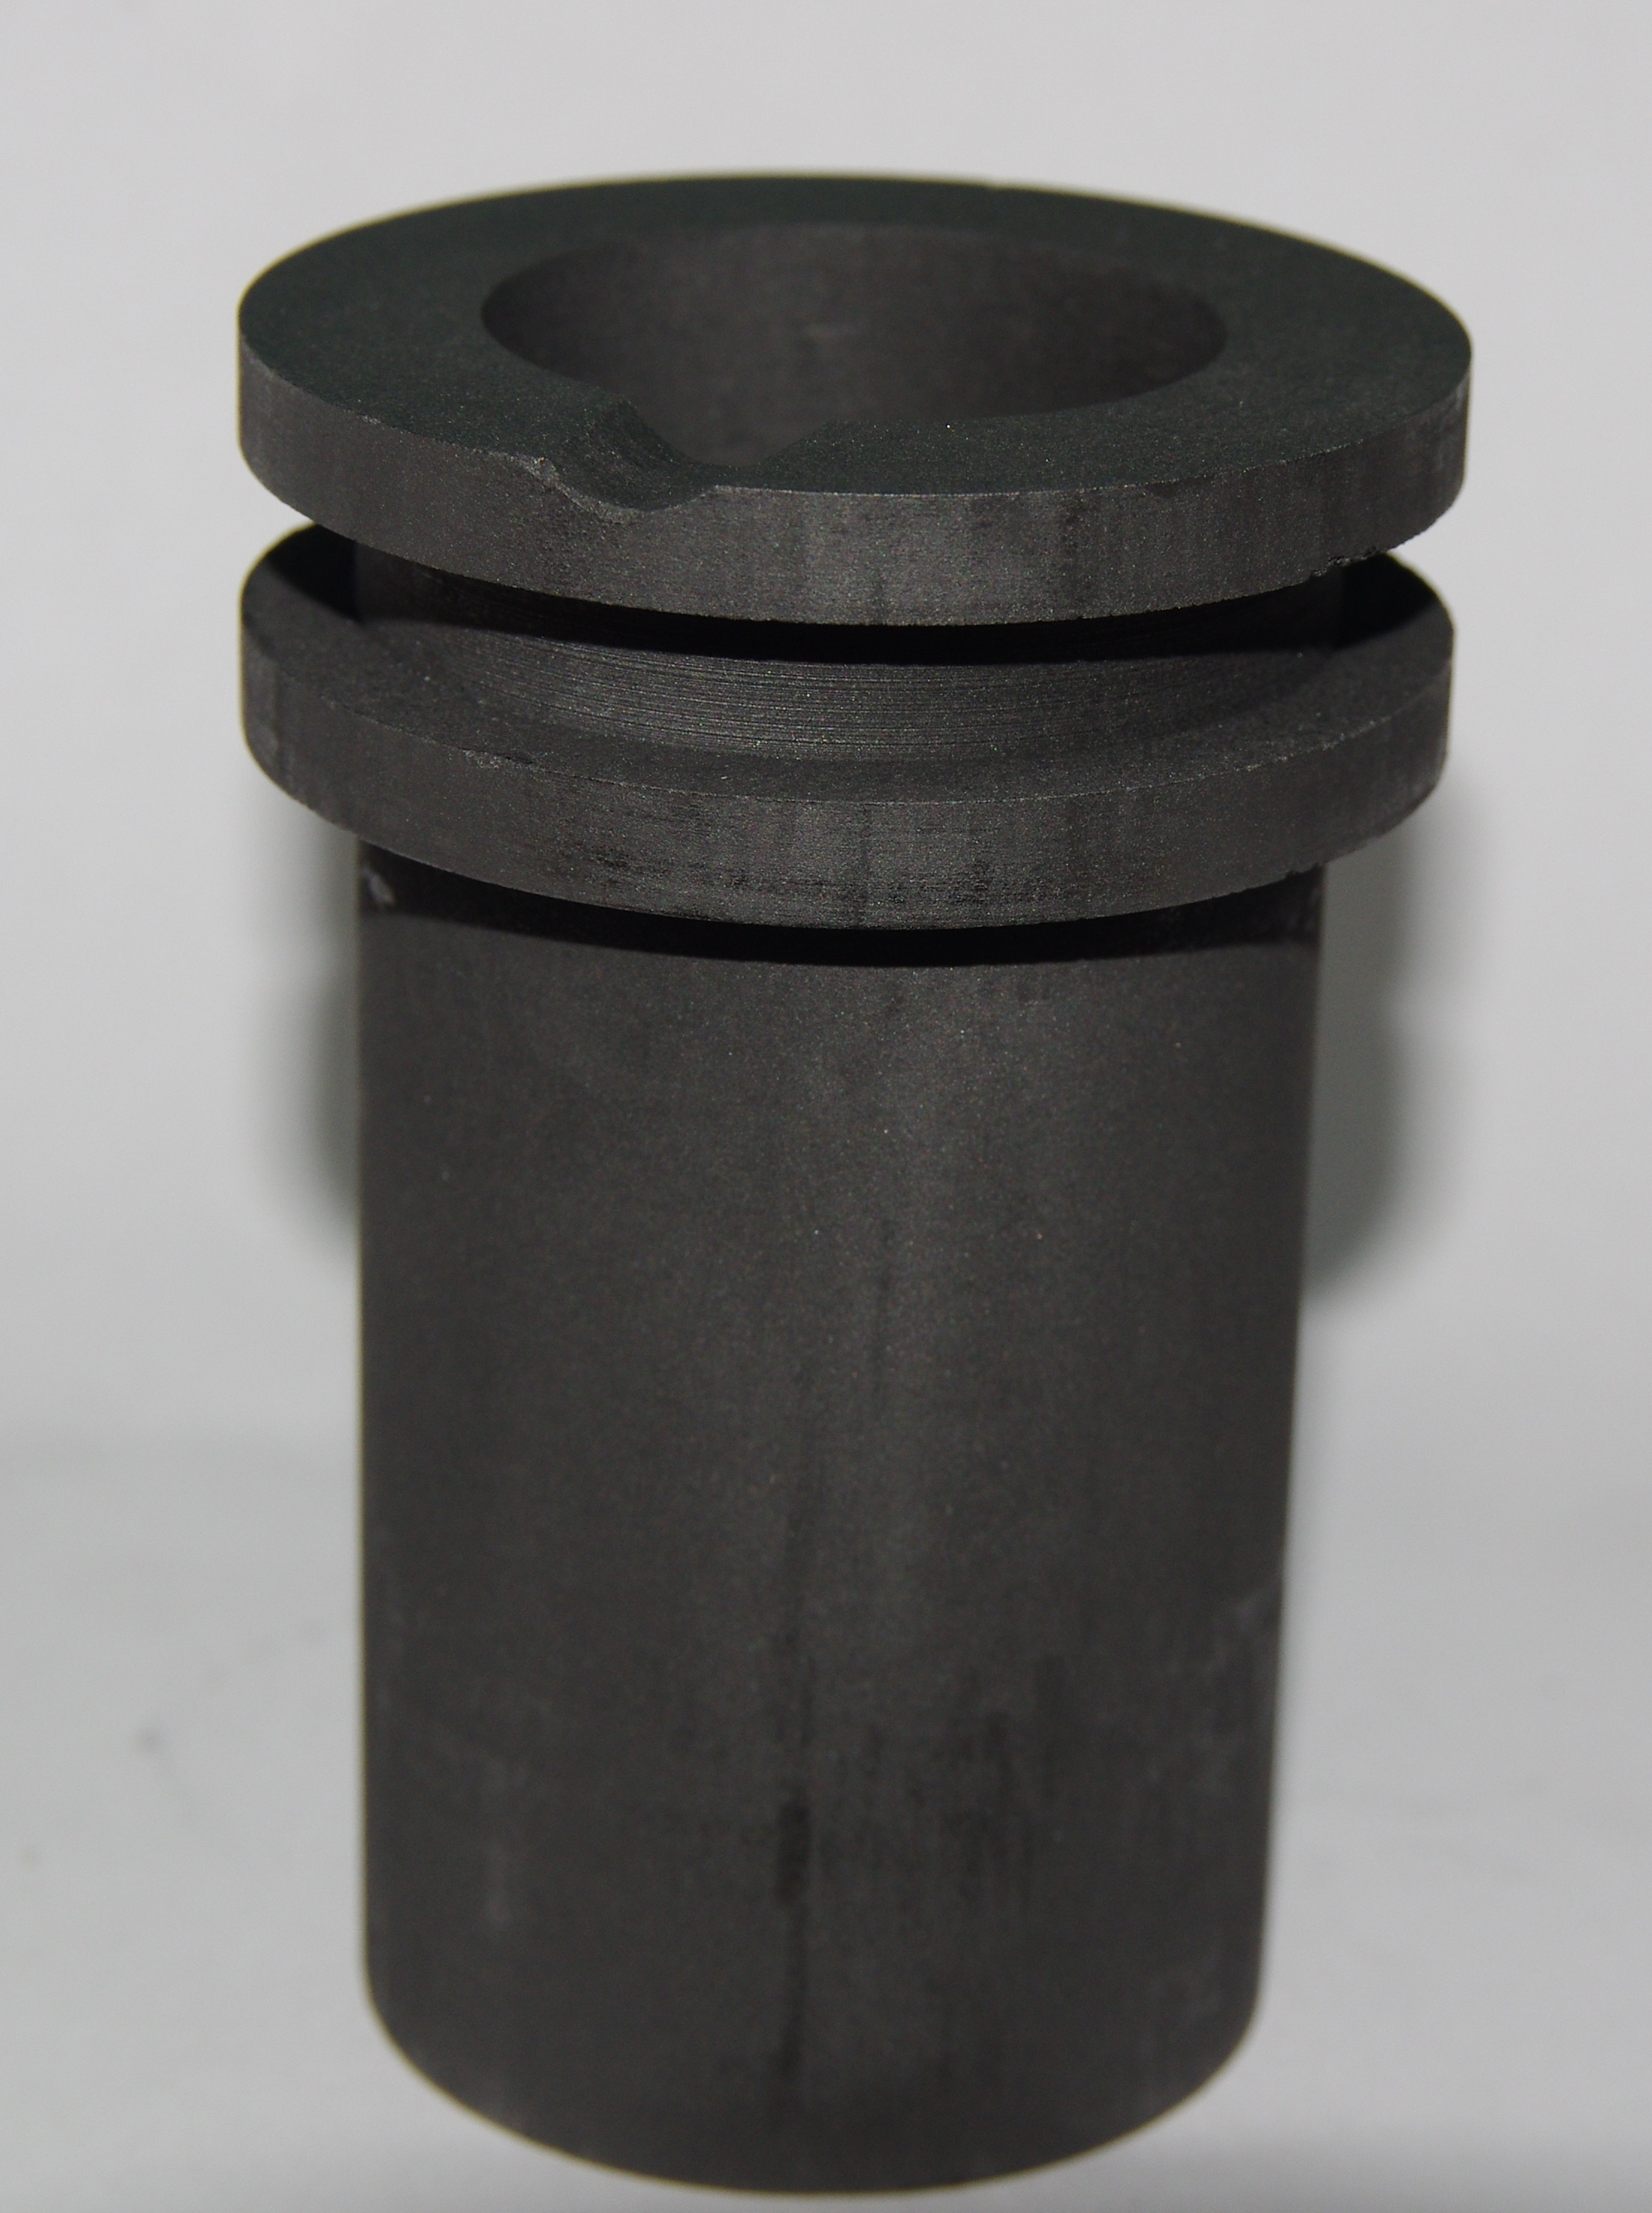 Graphite Crucibles For Melting Metal Sale Graphite Crucible For